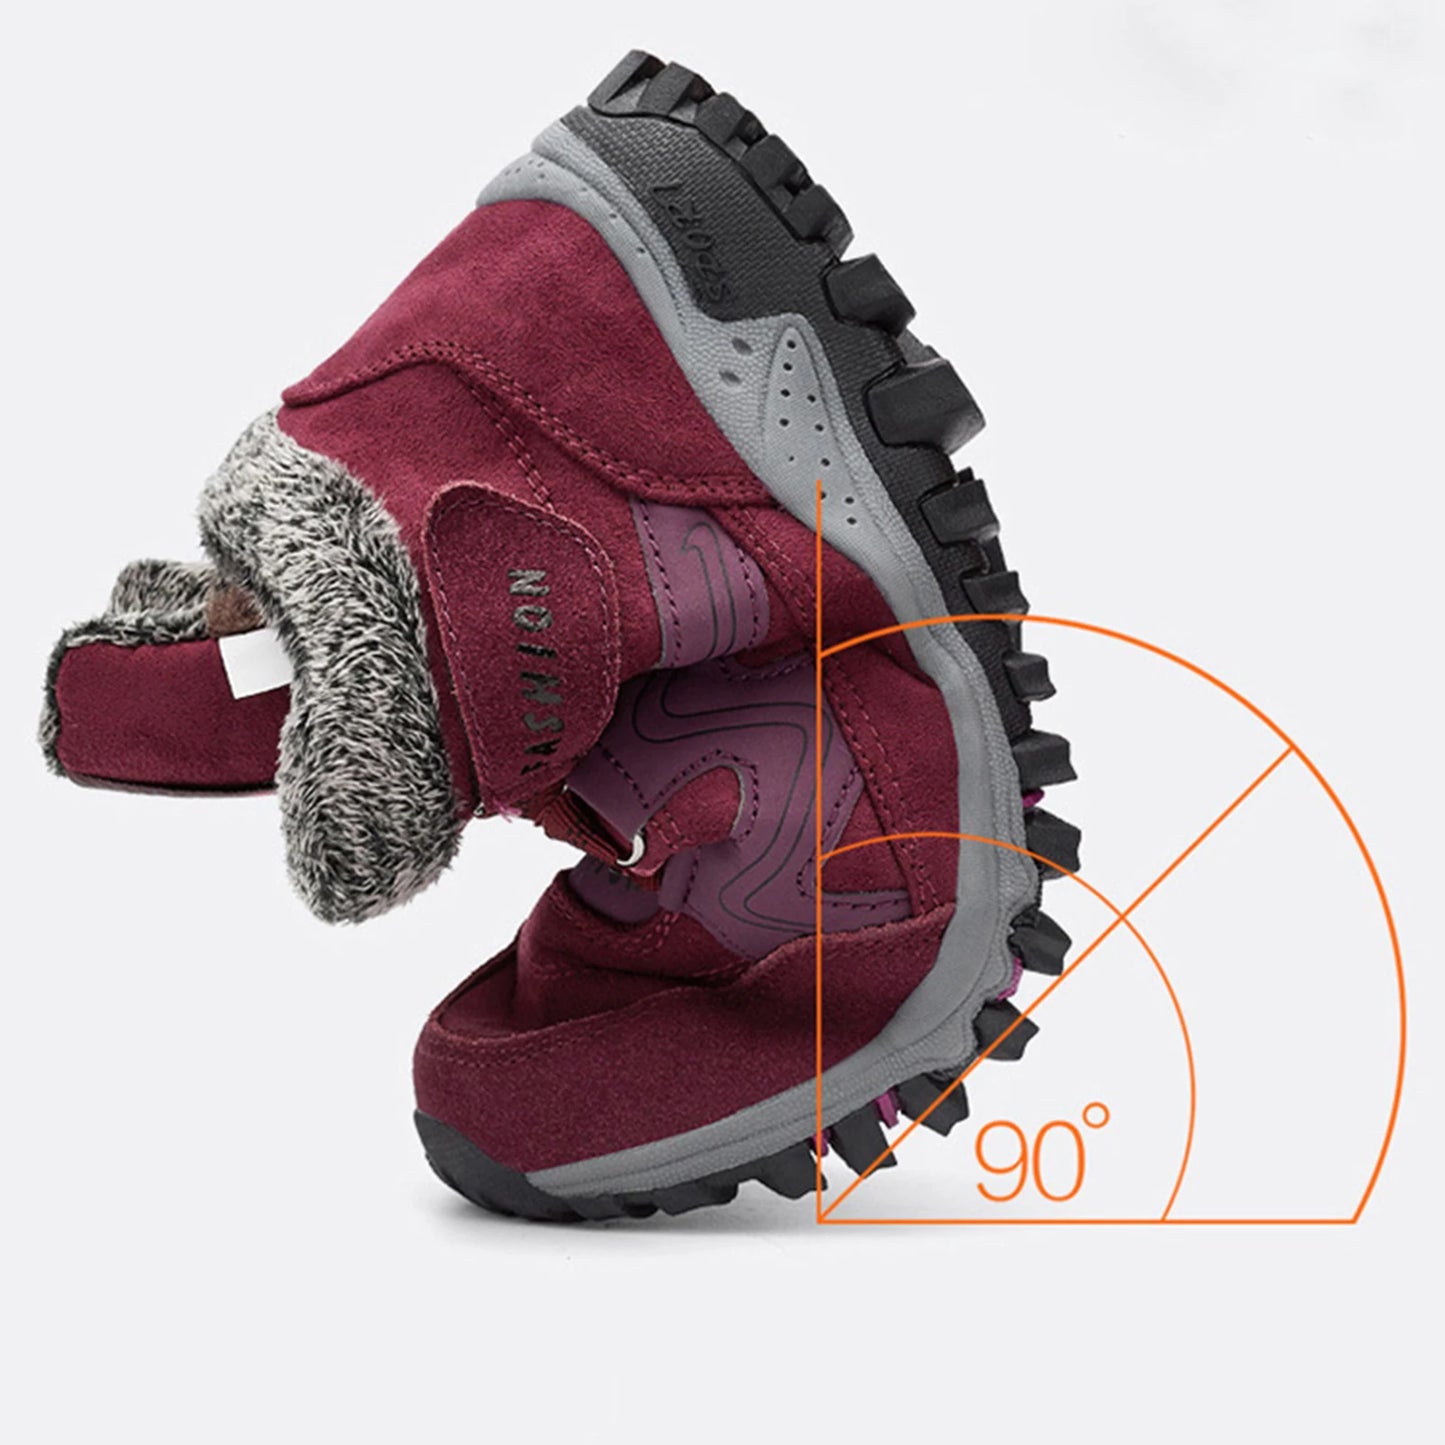 Winter Plush Snow Boots for Women/Casual Shoes Warm Fur Outdoor Snow Boots